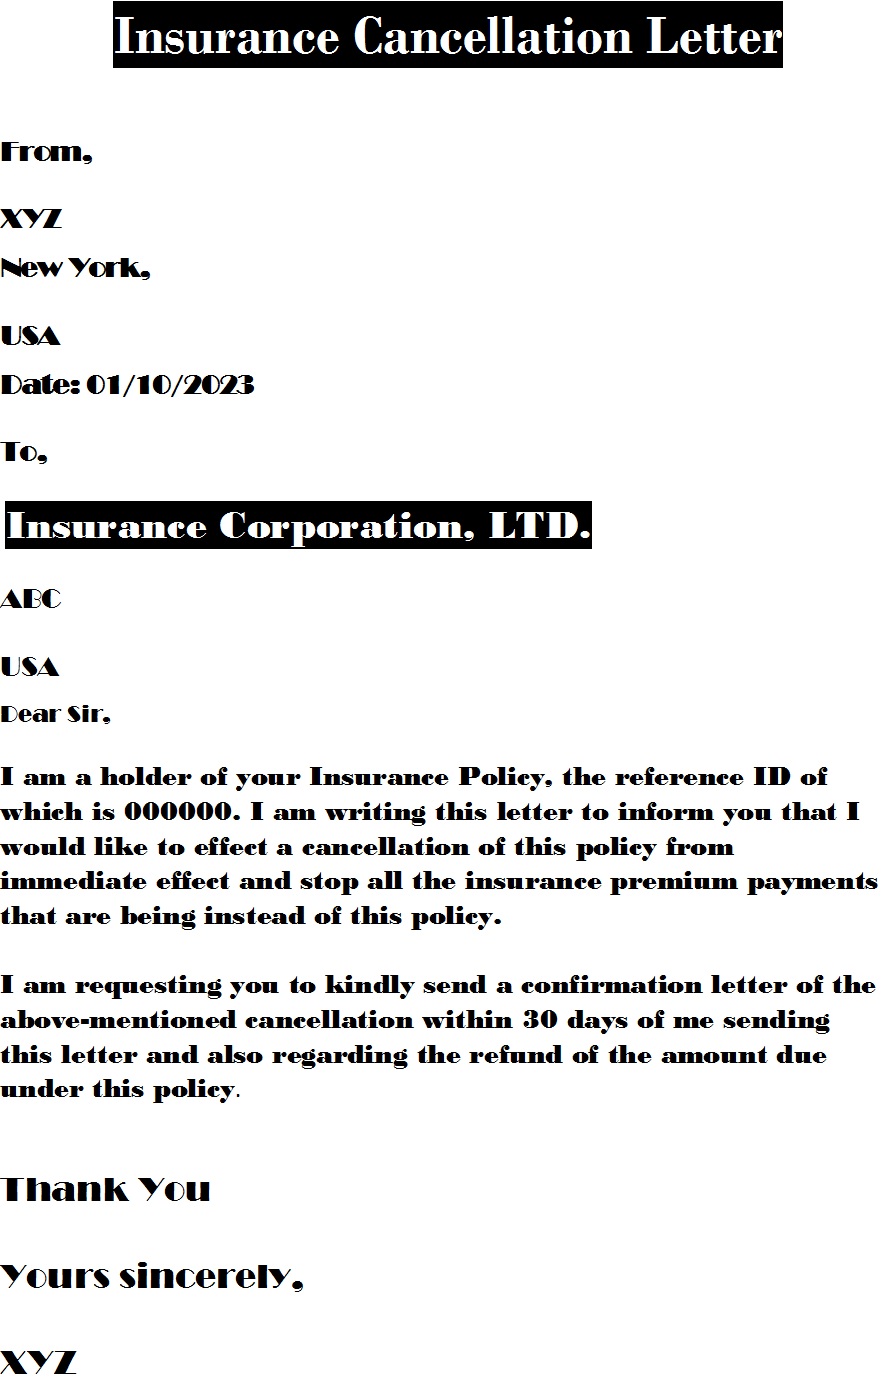 Insurance Cancellation Letter Templates